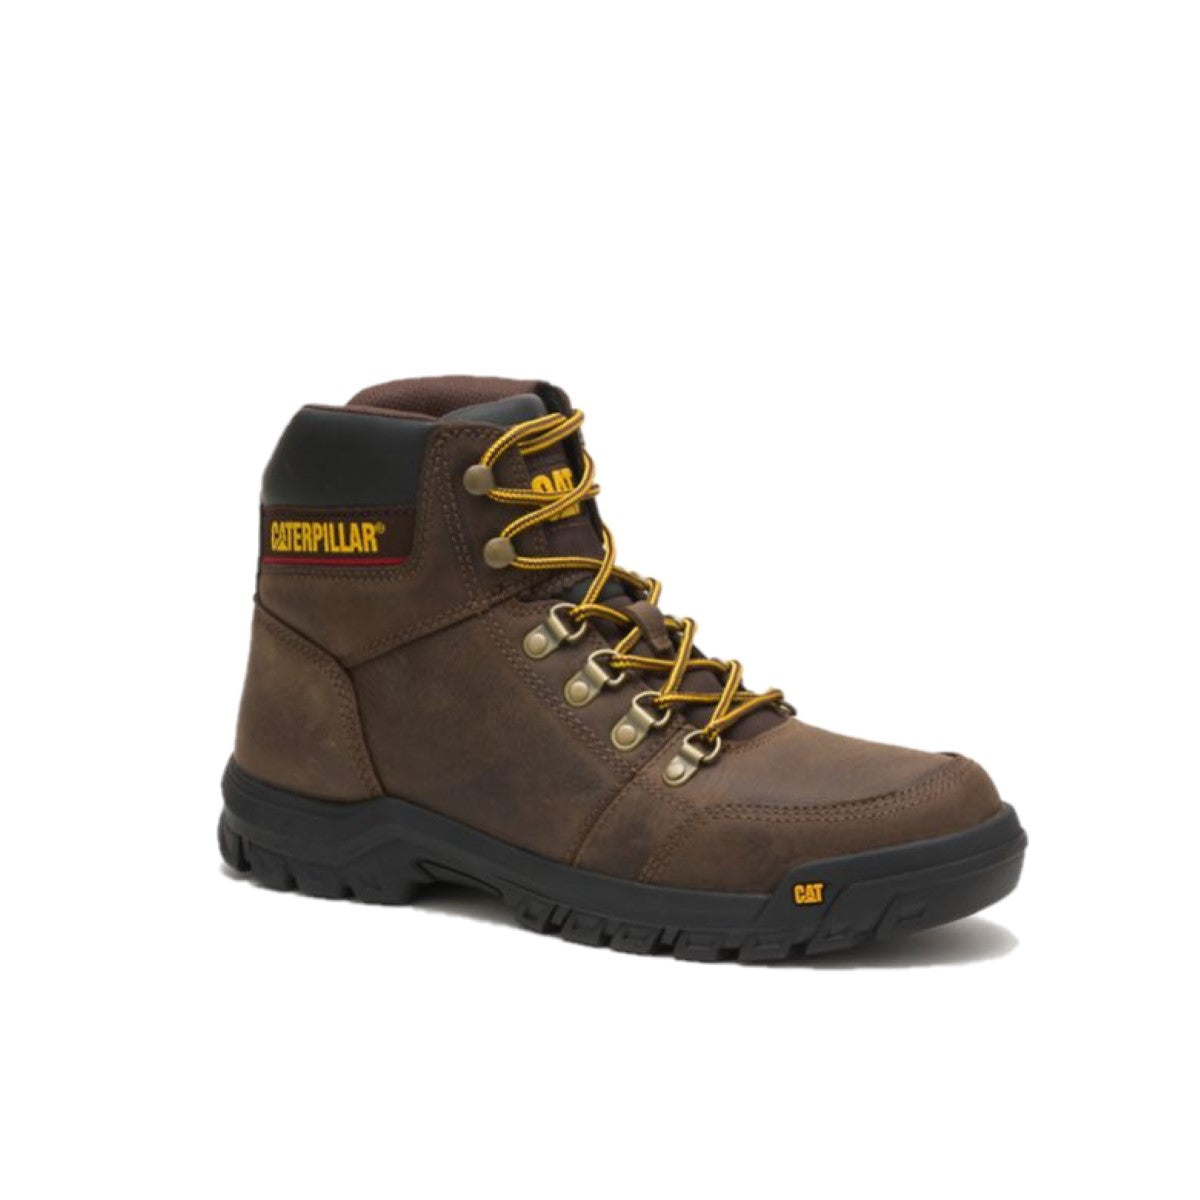 CATERPILLAR P74087-W OUTLINE MN'S (Wide) Brown Leather Work Boots